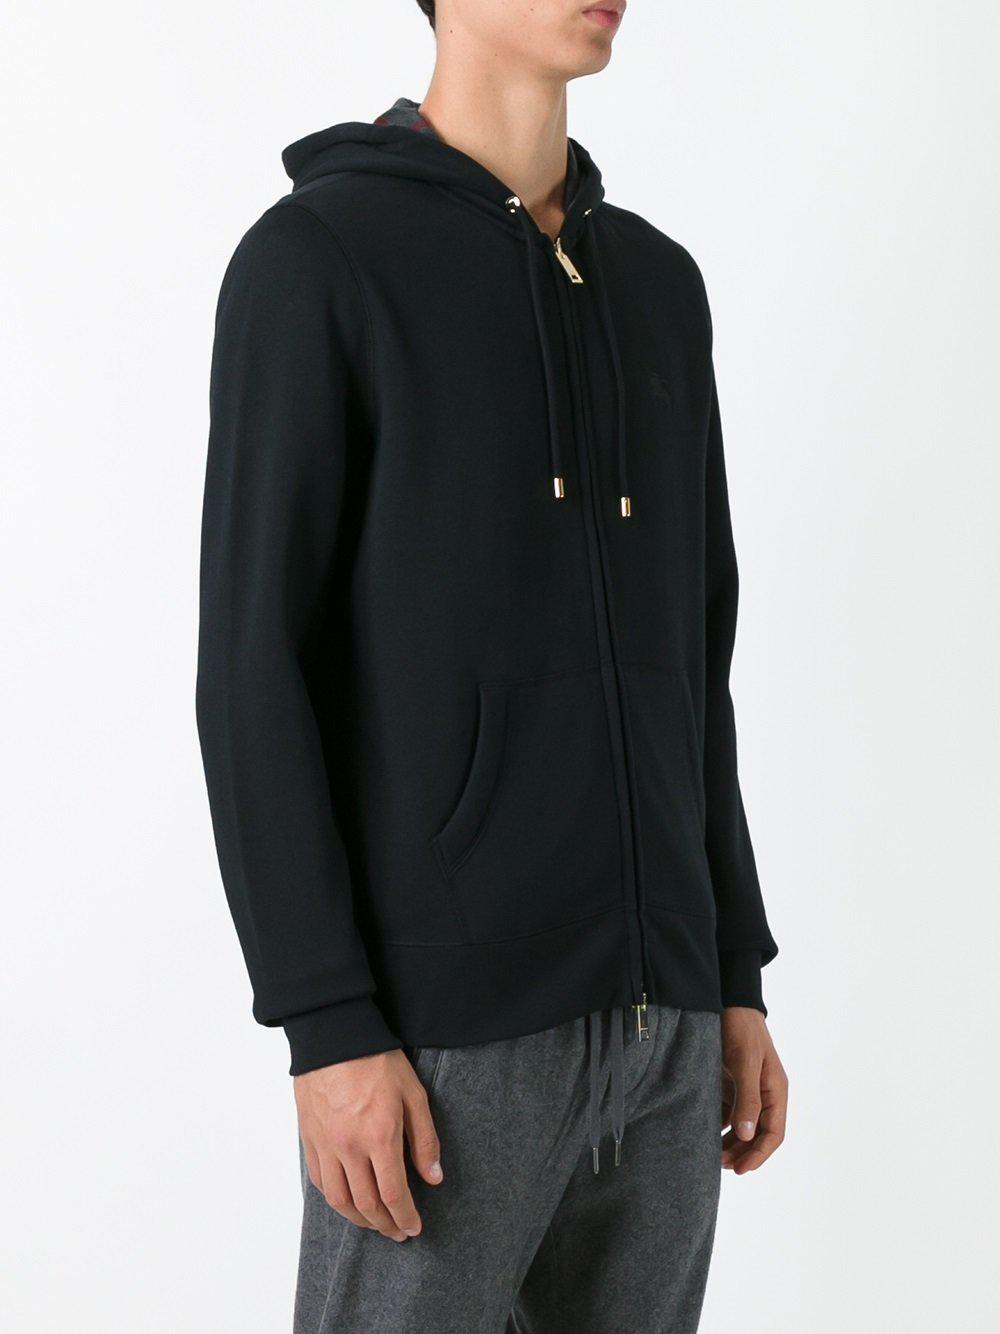 Burberry Cotton Logo Embroidered Zipped Hoodie in Black for Men - Lyst